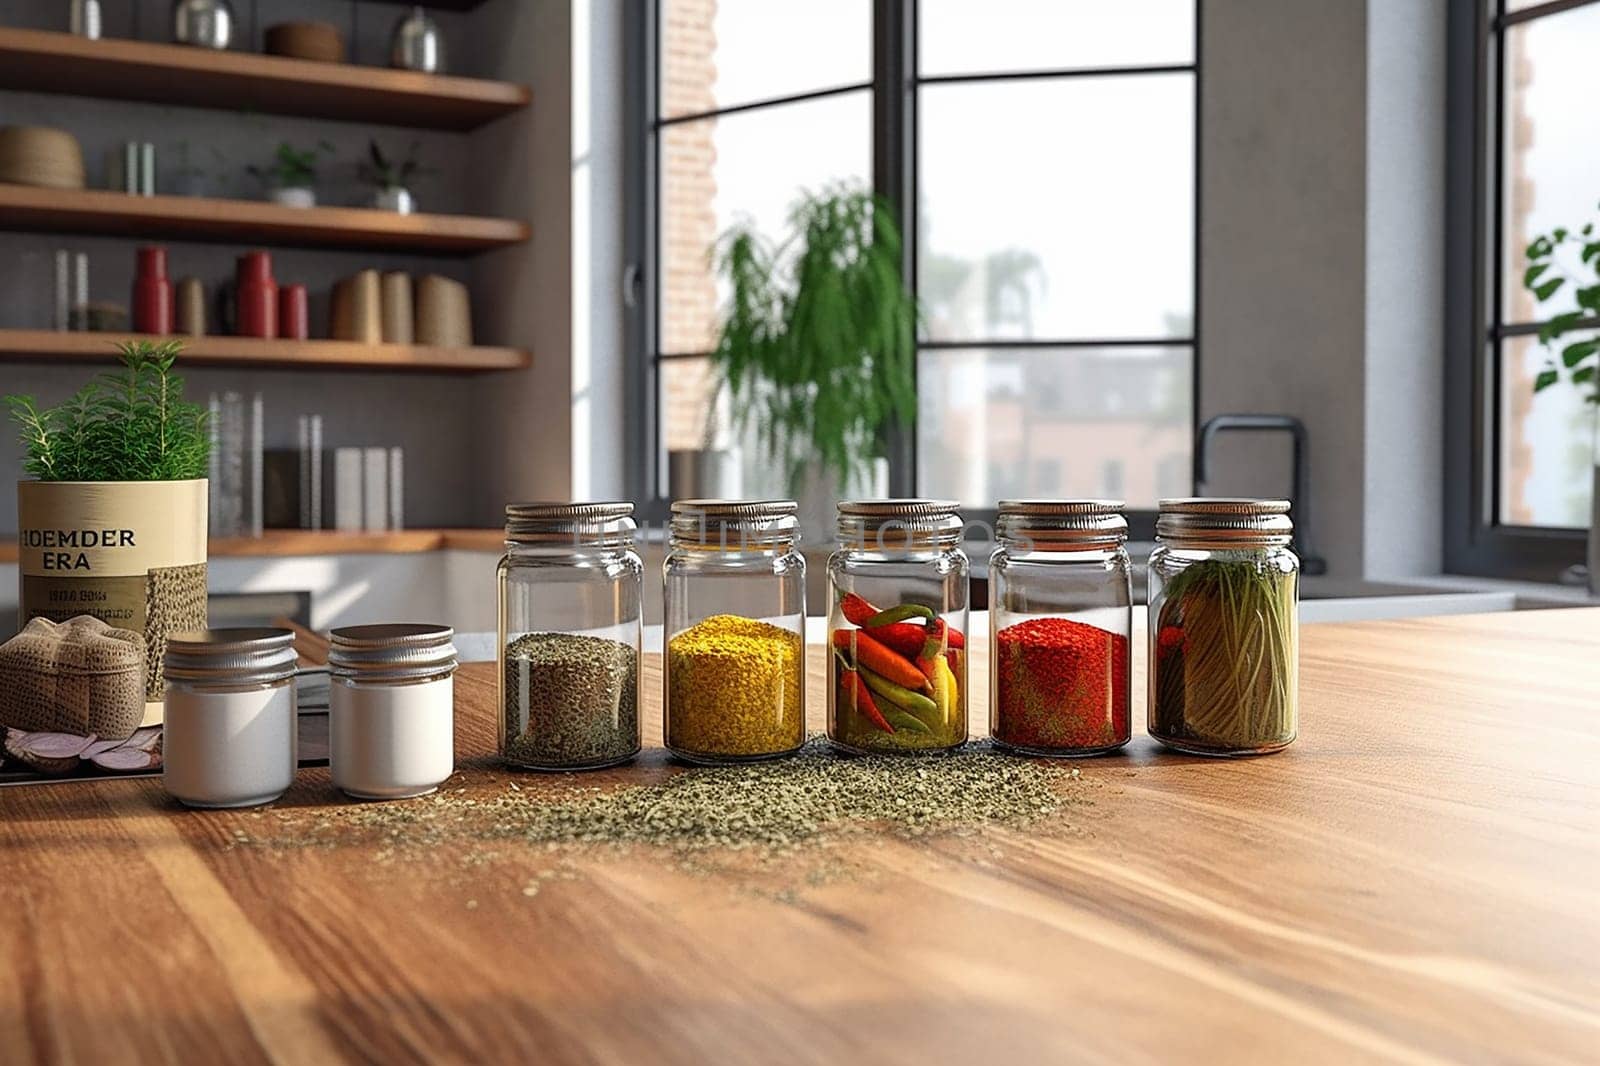 A photo of various spice jars on a wooden kitchen counter with a window in the background. The jars contain different types of herbs and spices.